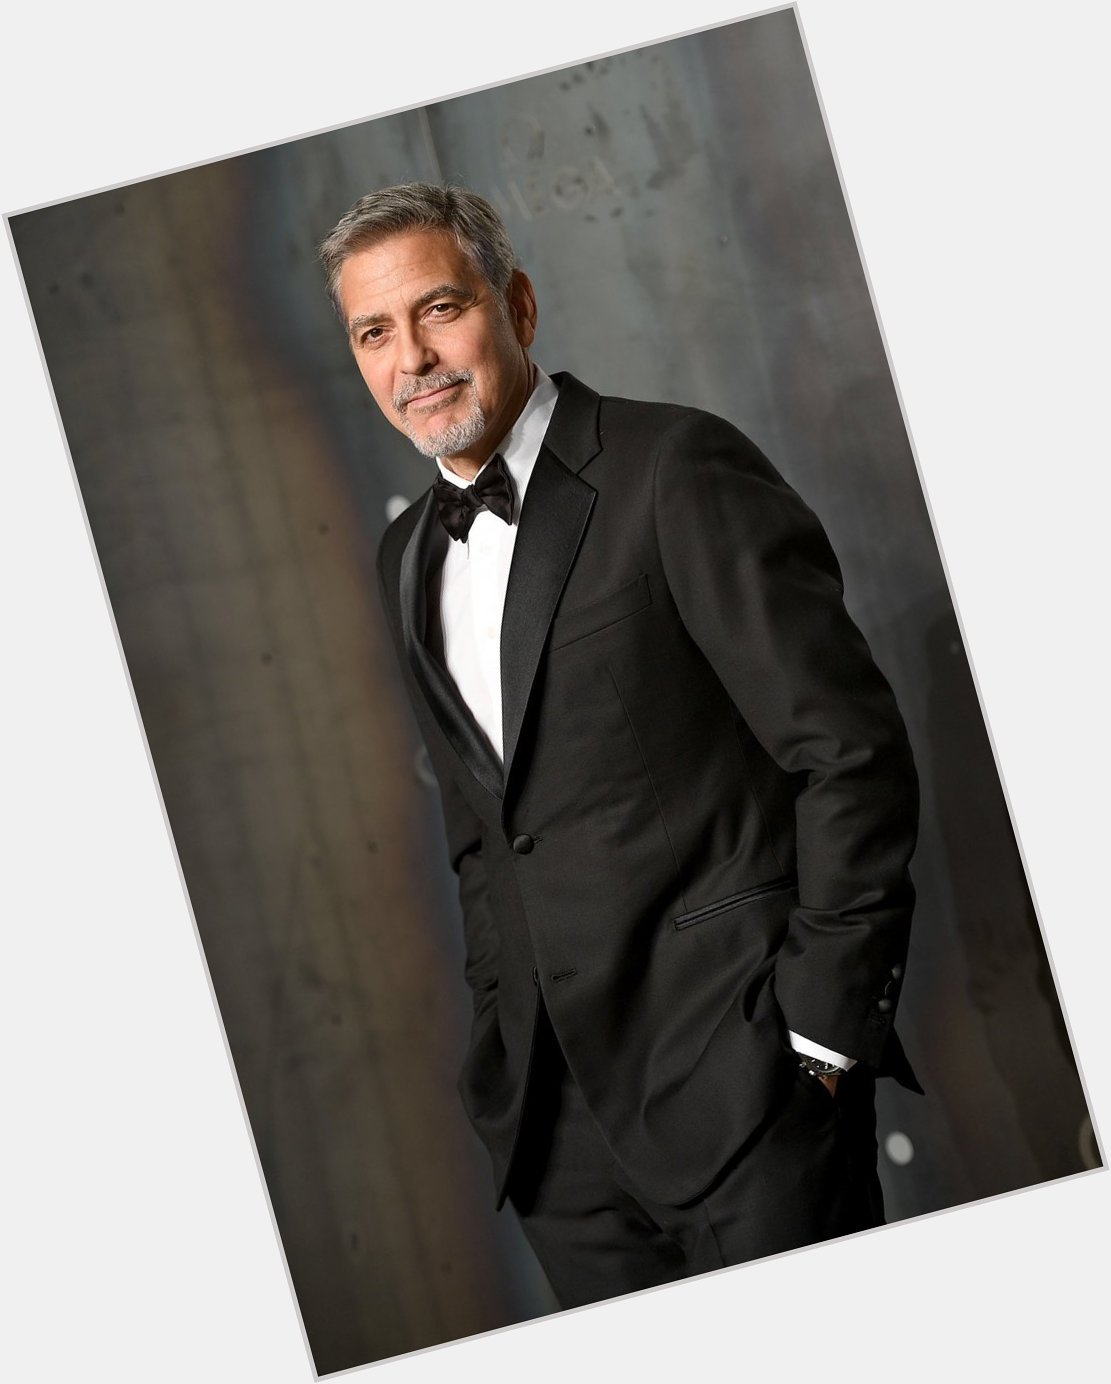 Wishing a very happy 60th birthday to George Clooney!   